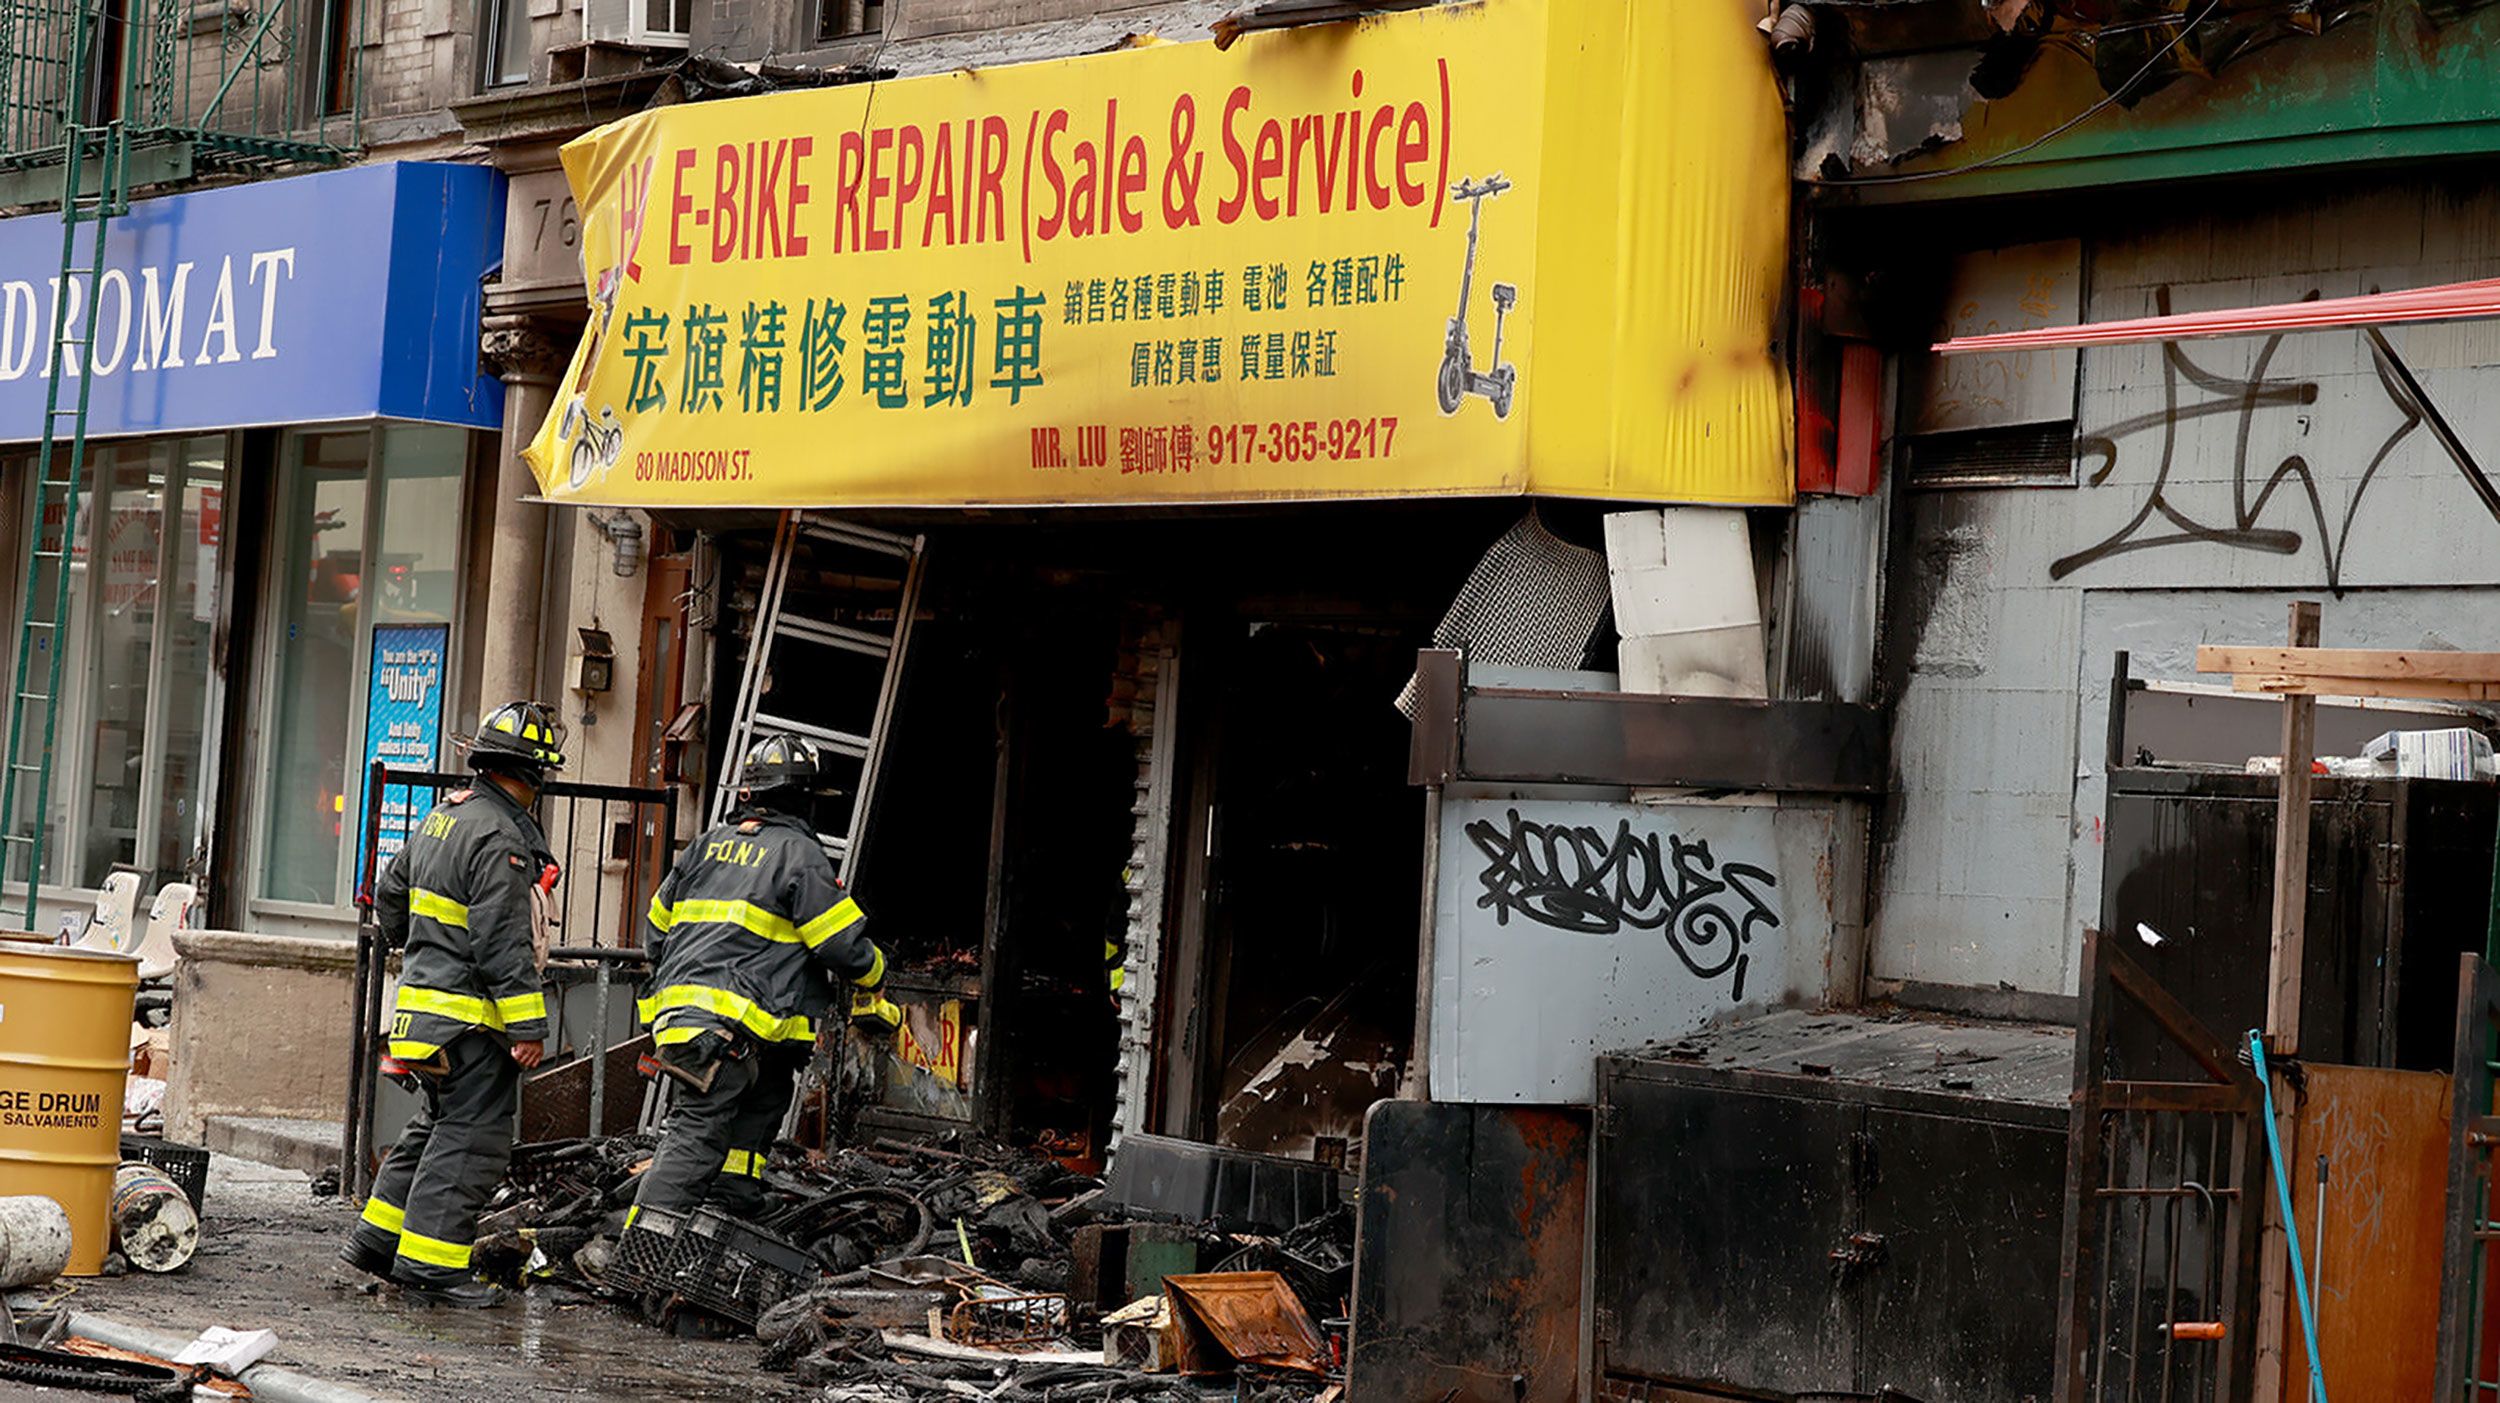 Fire that killed 4 at NYC e-bike store was caused by lithium ion batteries,  fire commissioner says